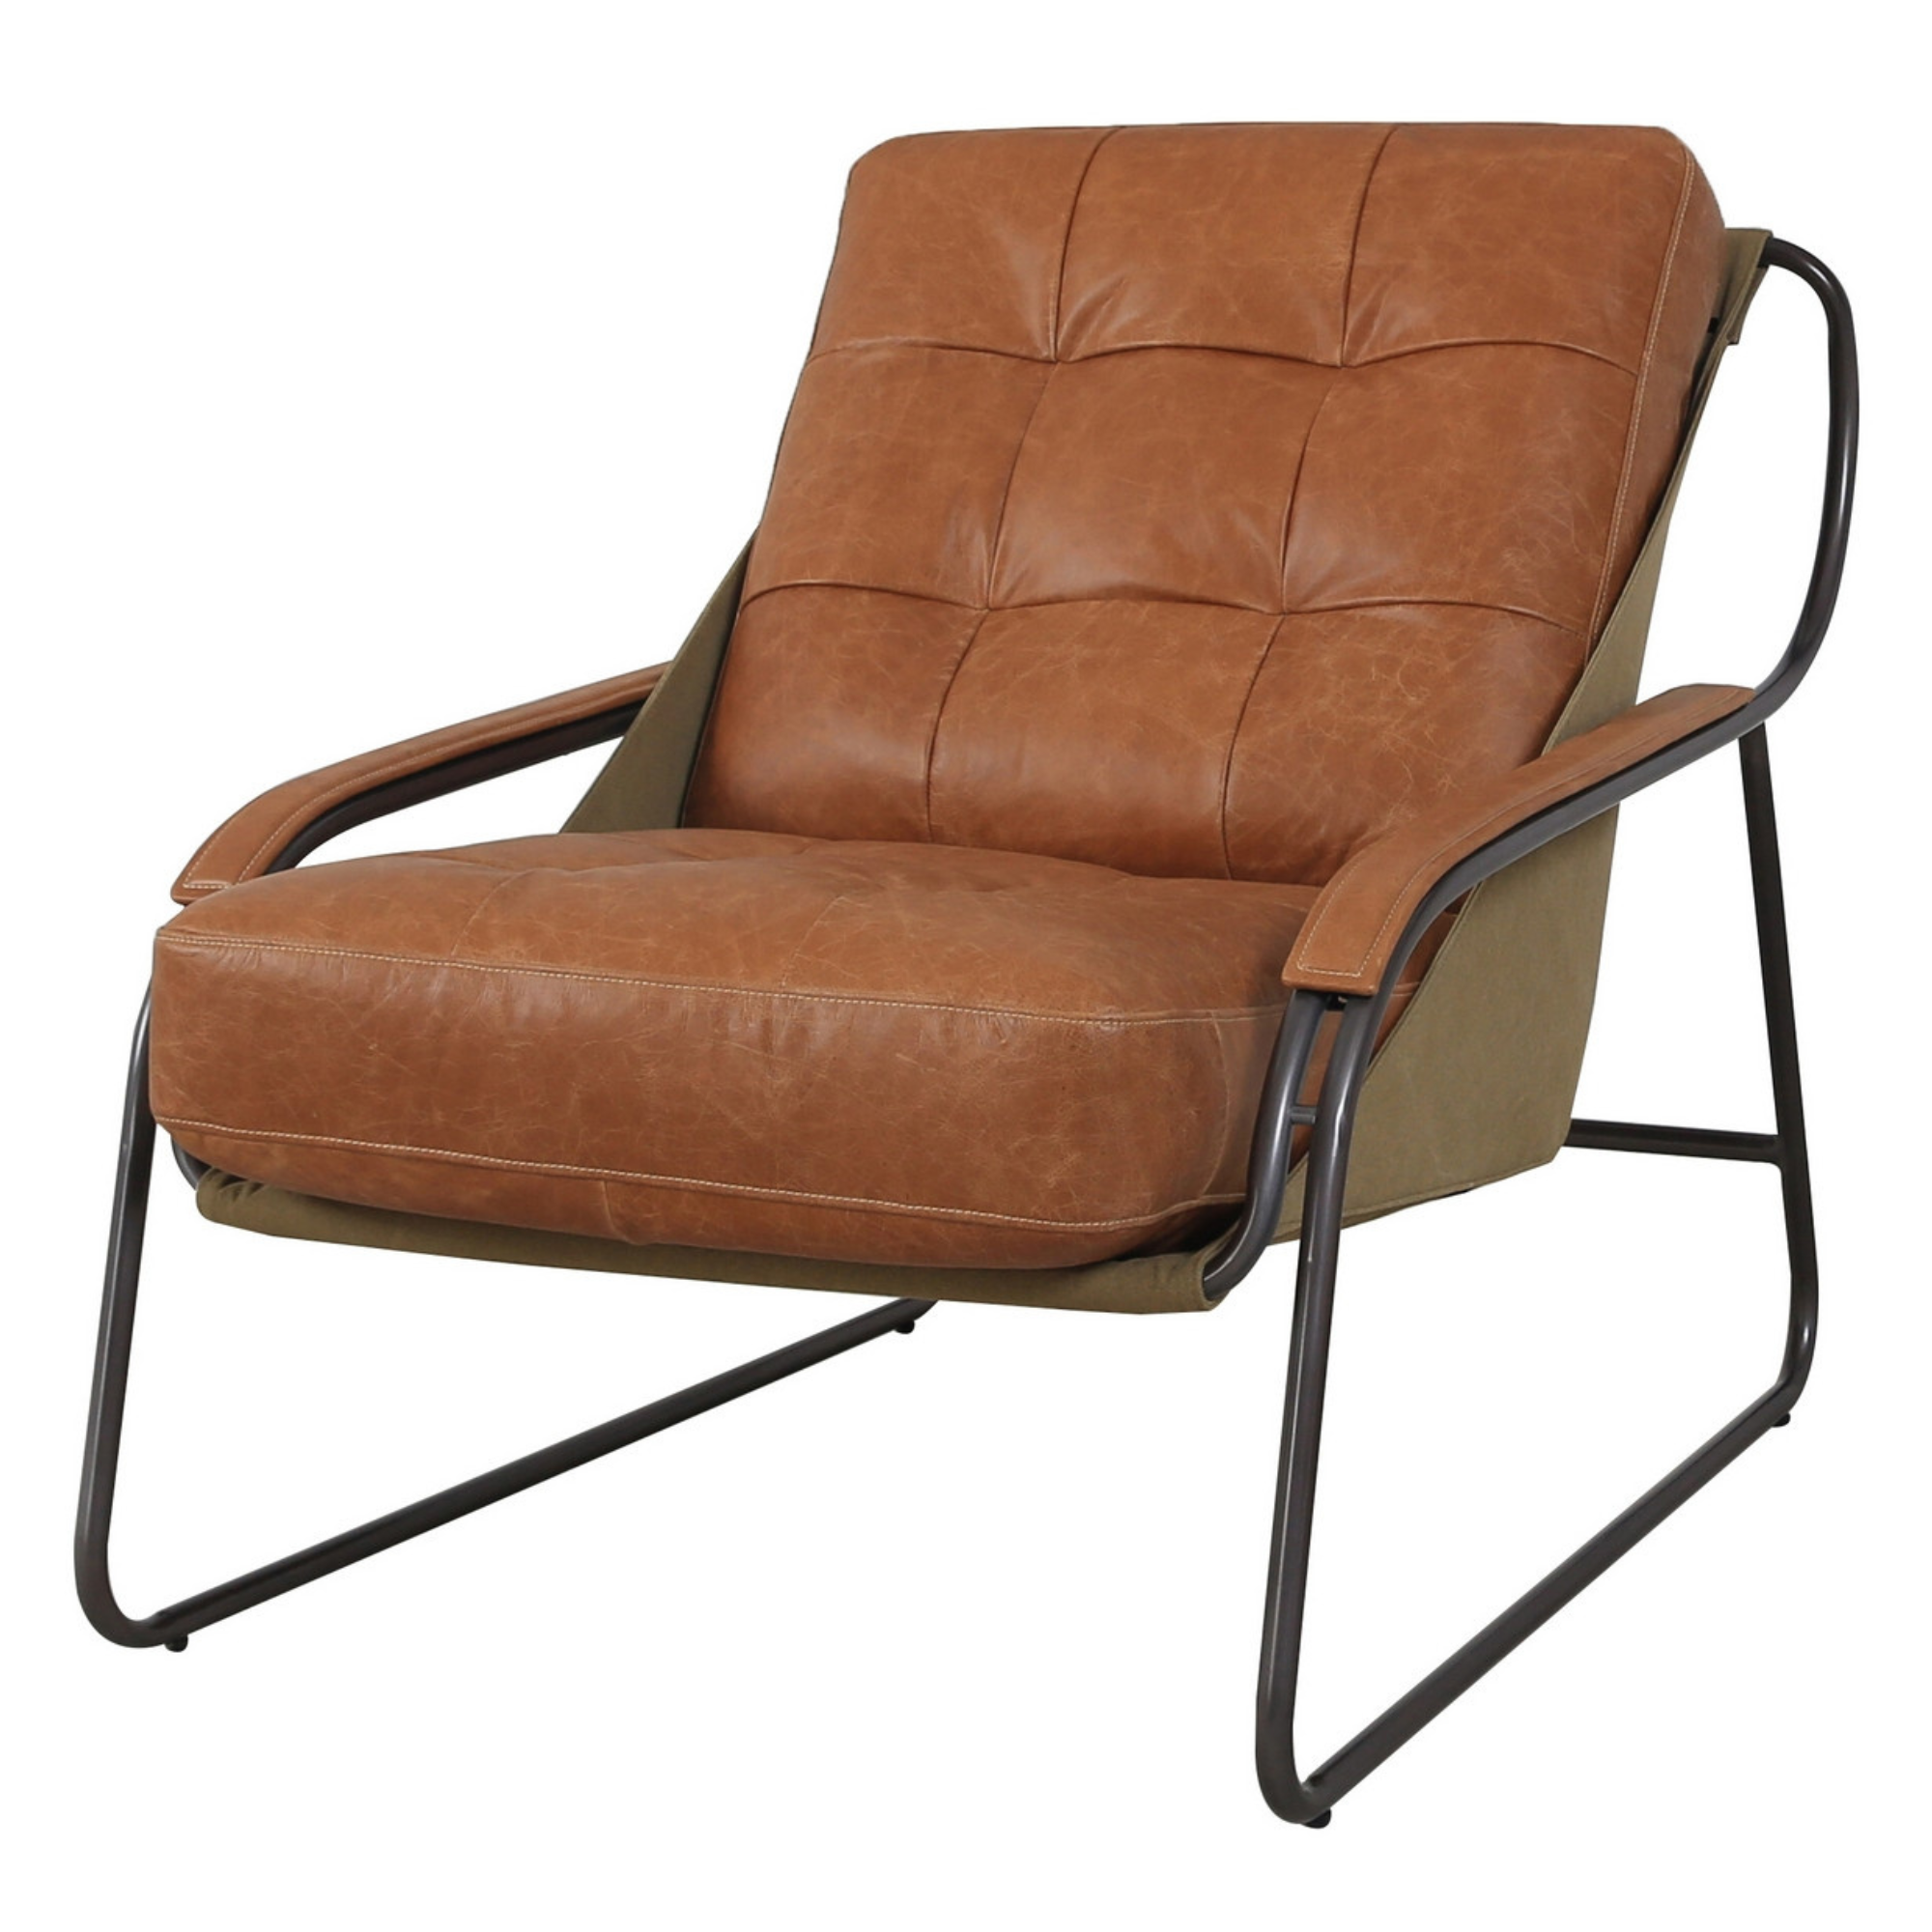 ZENITH LEATHER & CANVAS CHAIR